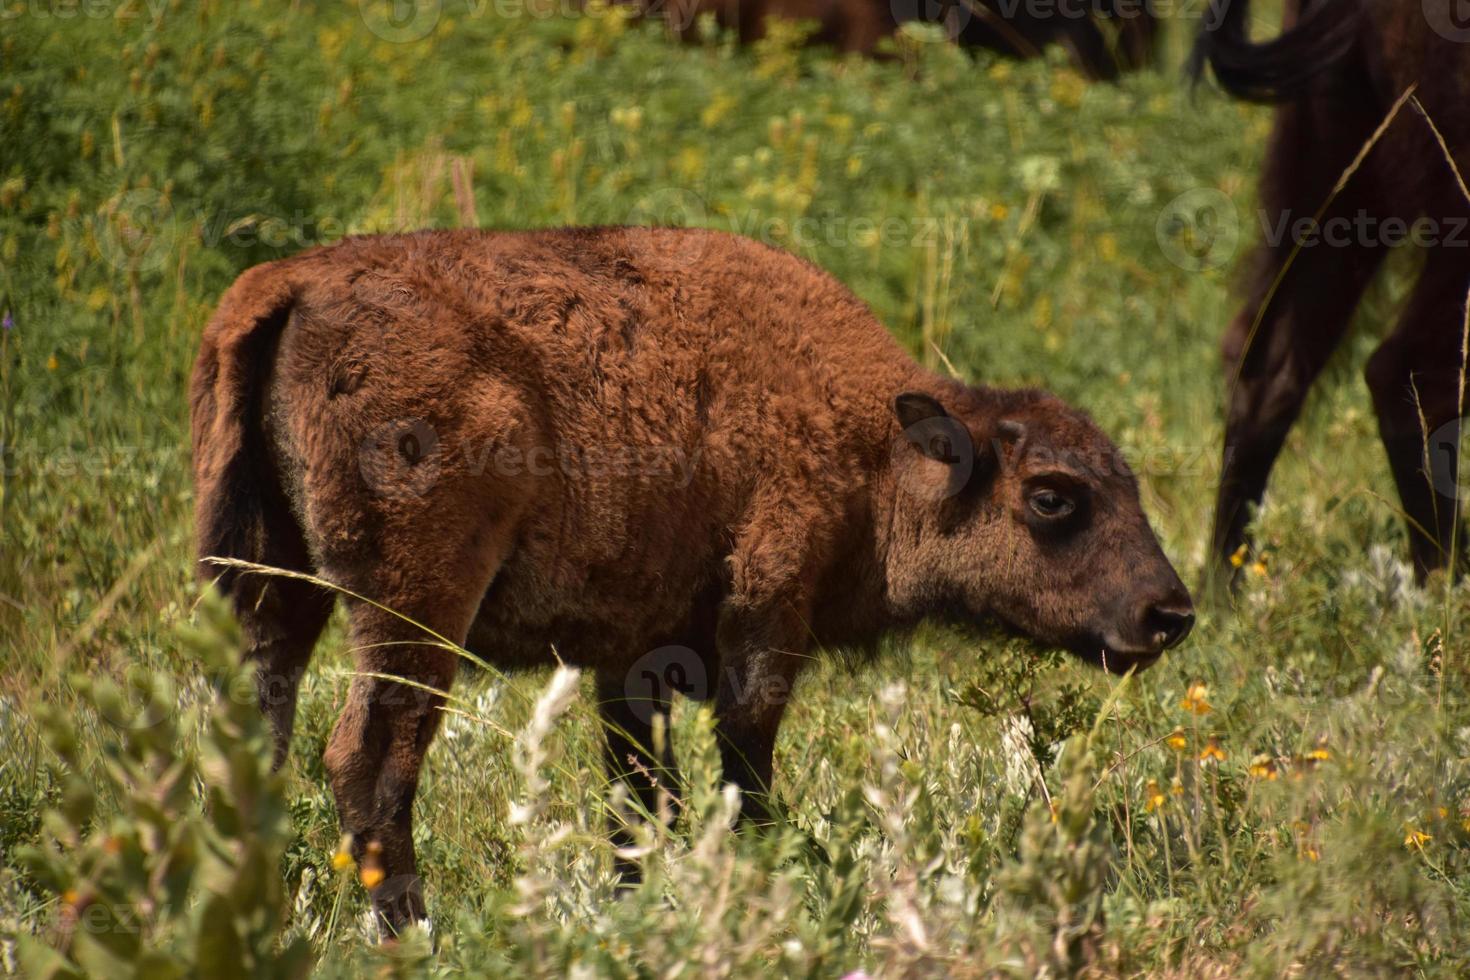 Close Up with a Fuzzy Baby Bison Calf photo